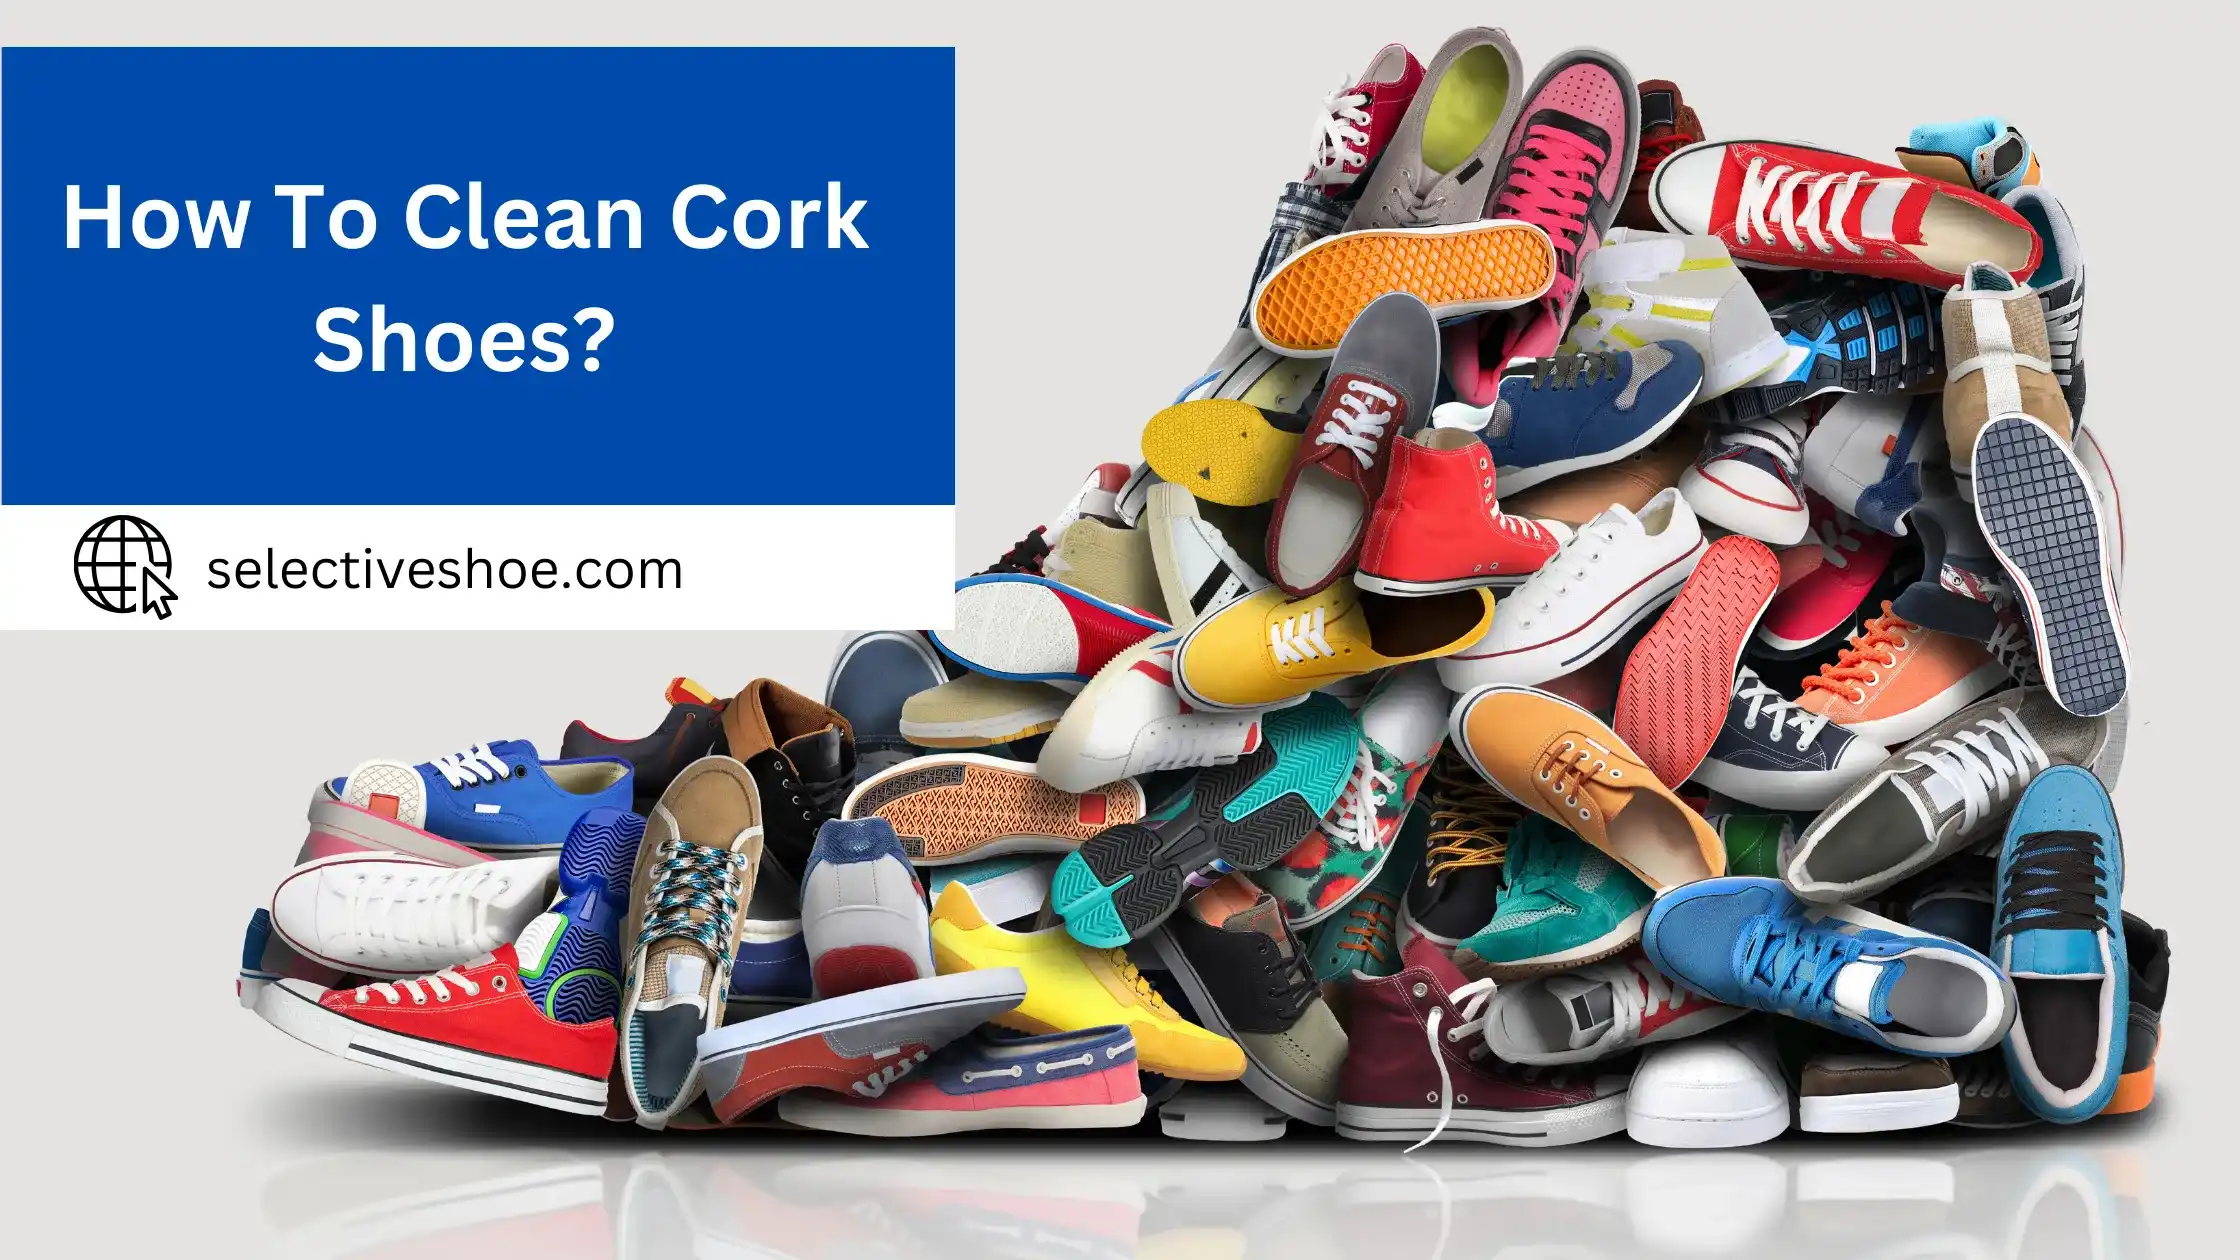 How to Clean Cork Shoes? Cleaning & Caring Tips